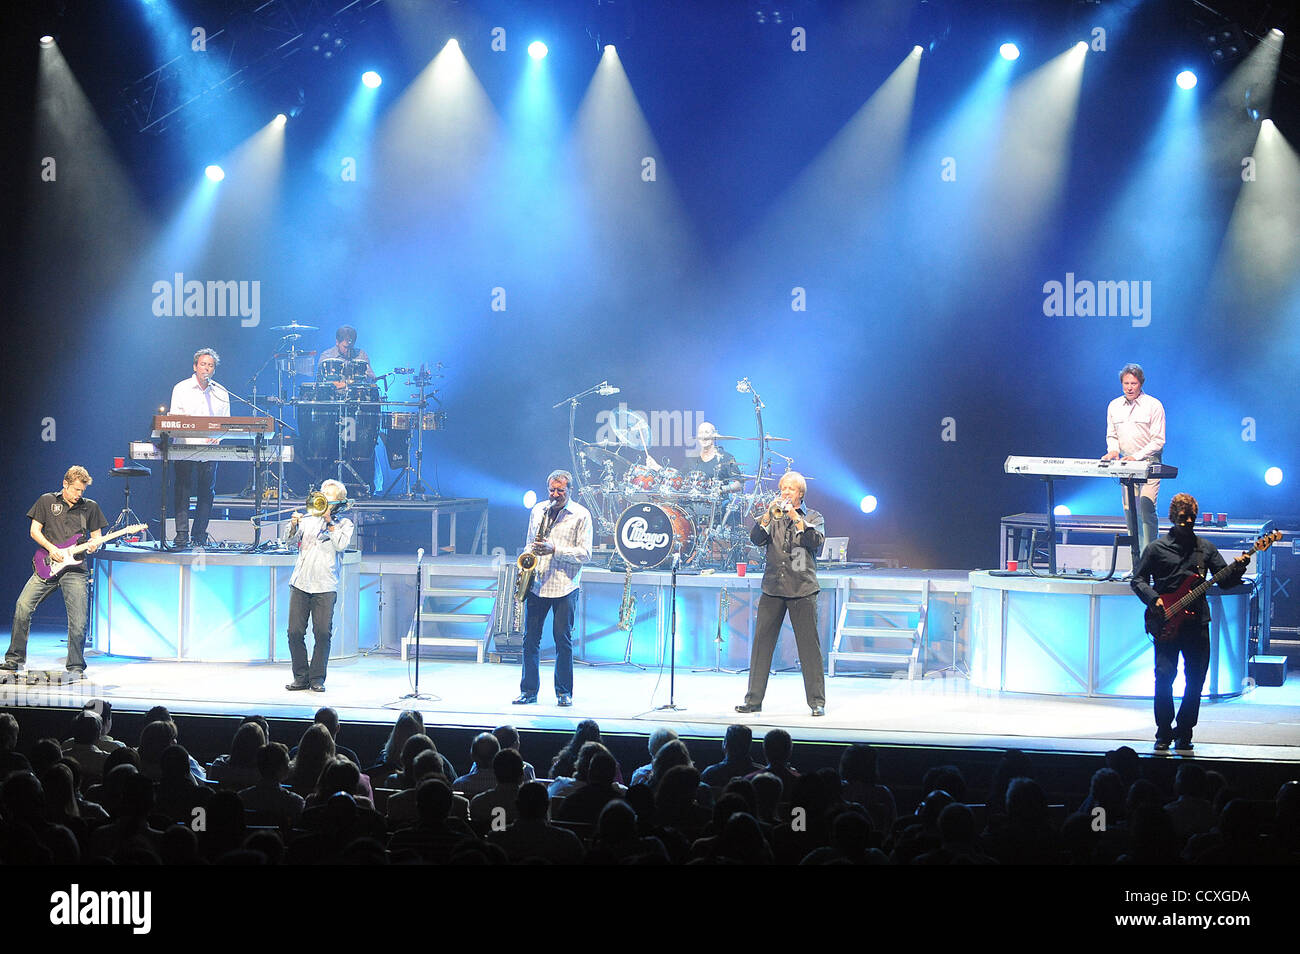 May 18, 2010 - Durham, North Carolina; USA - (R-L) Singer / Keyboardist ROBERT LAMM, Bass Guitarist JASON SCHEFF, Trumpeter LEE LOUGHNANE, Saxophonist WALTER PARAZAIDER, Guitarist KEITH HOWLAND, Drummer TRIS IMBODEN, and Keyboardist LOU PARDINI of the band Chicago performs live as their 2010 tour ma Stock Photo